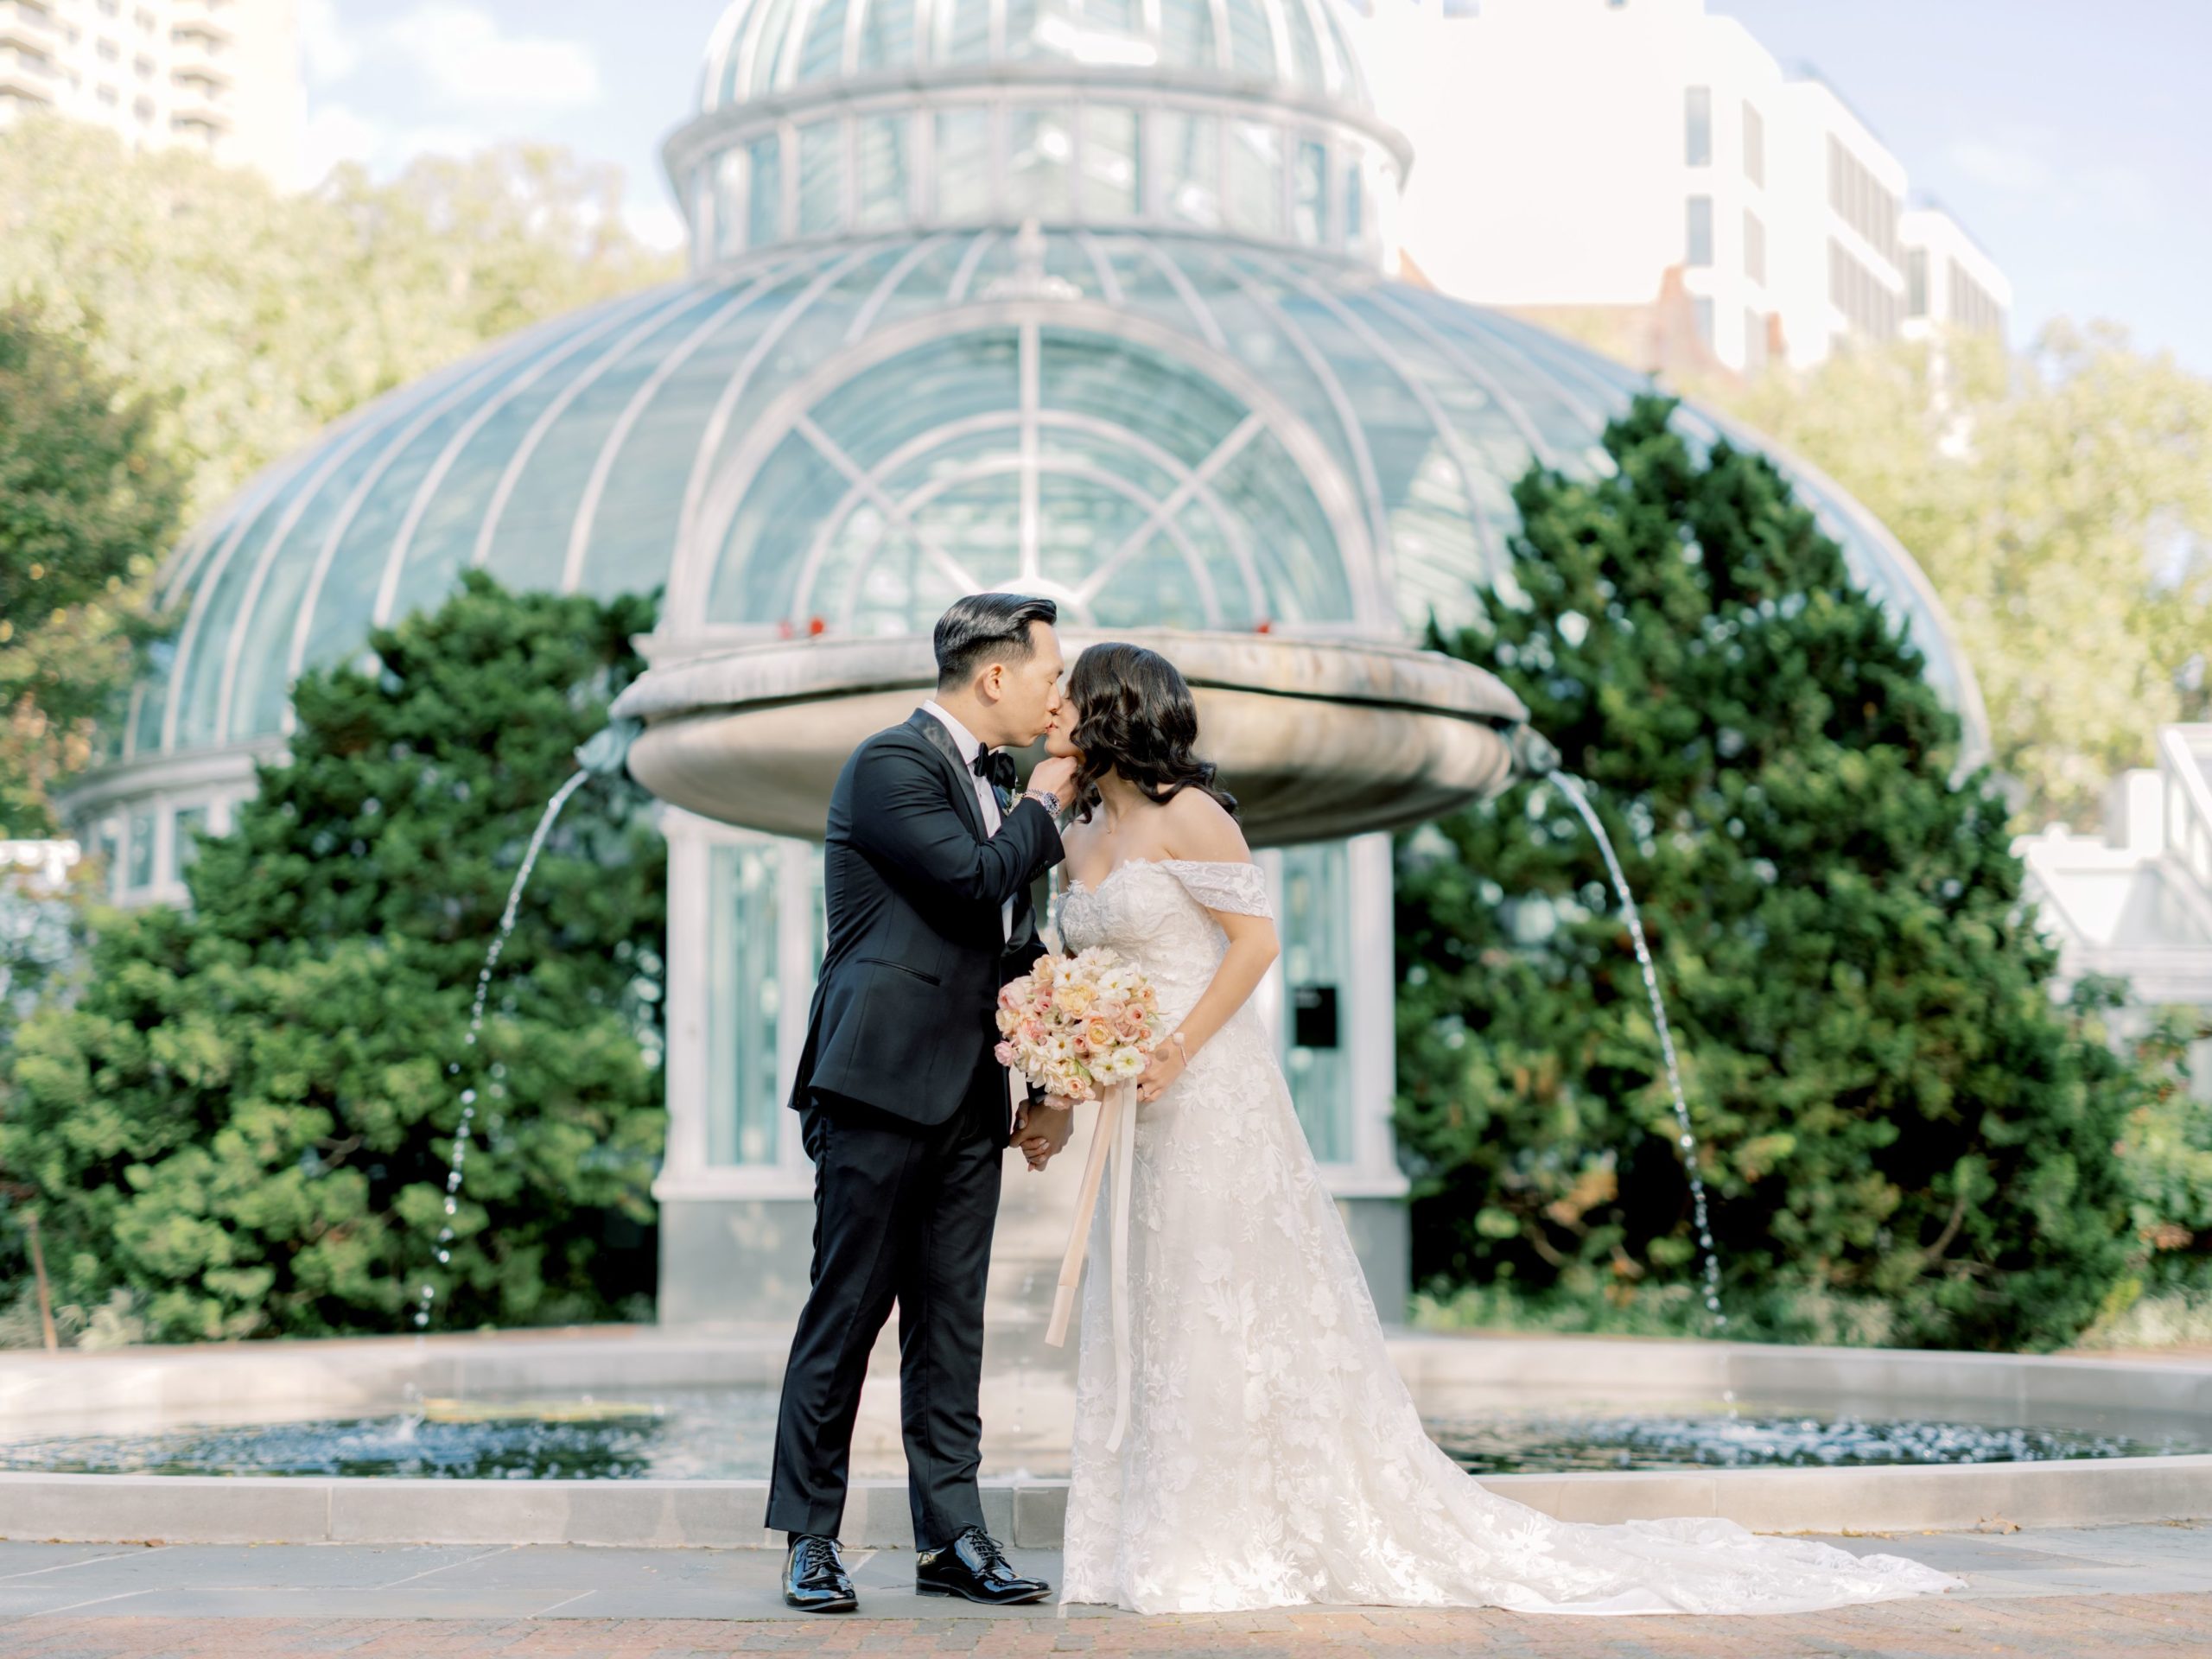 The bride and the groom are kissing each other in front of a beautiful fountain. Hiring a wedding planner image by Jenny Fu Studio